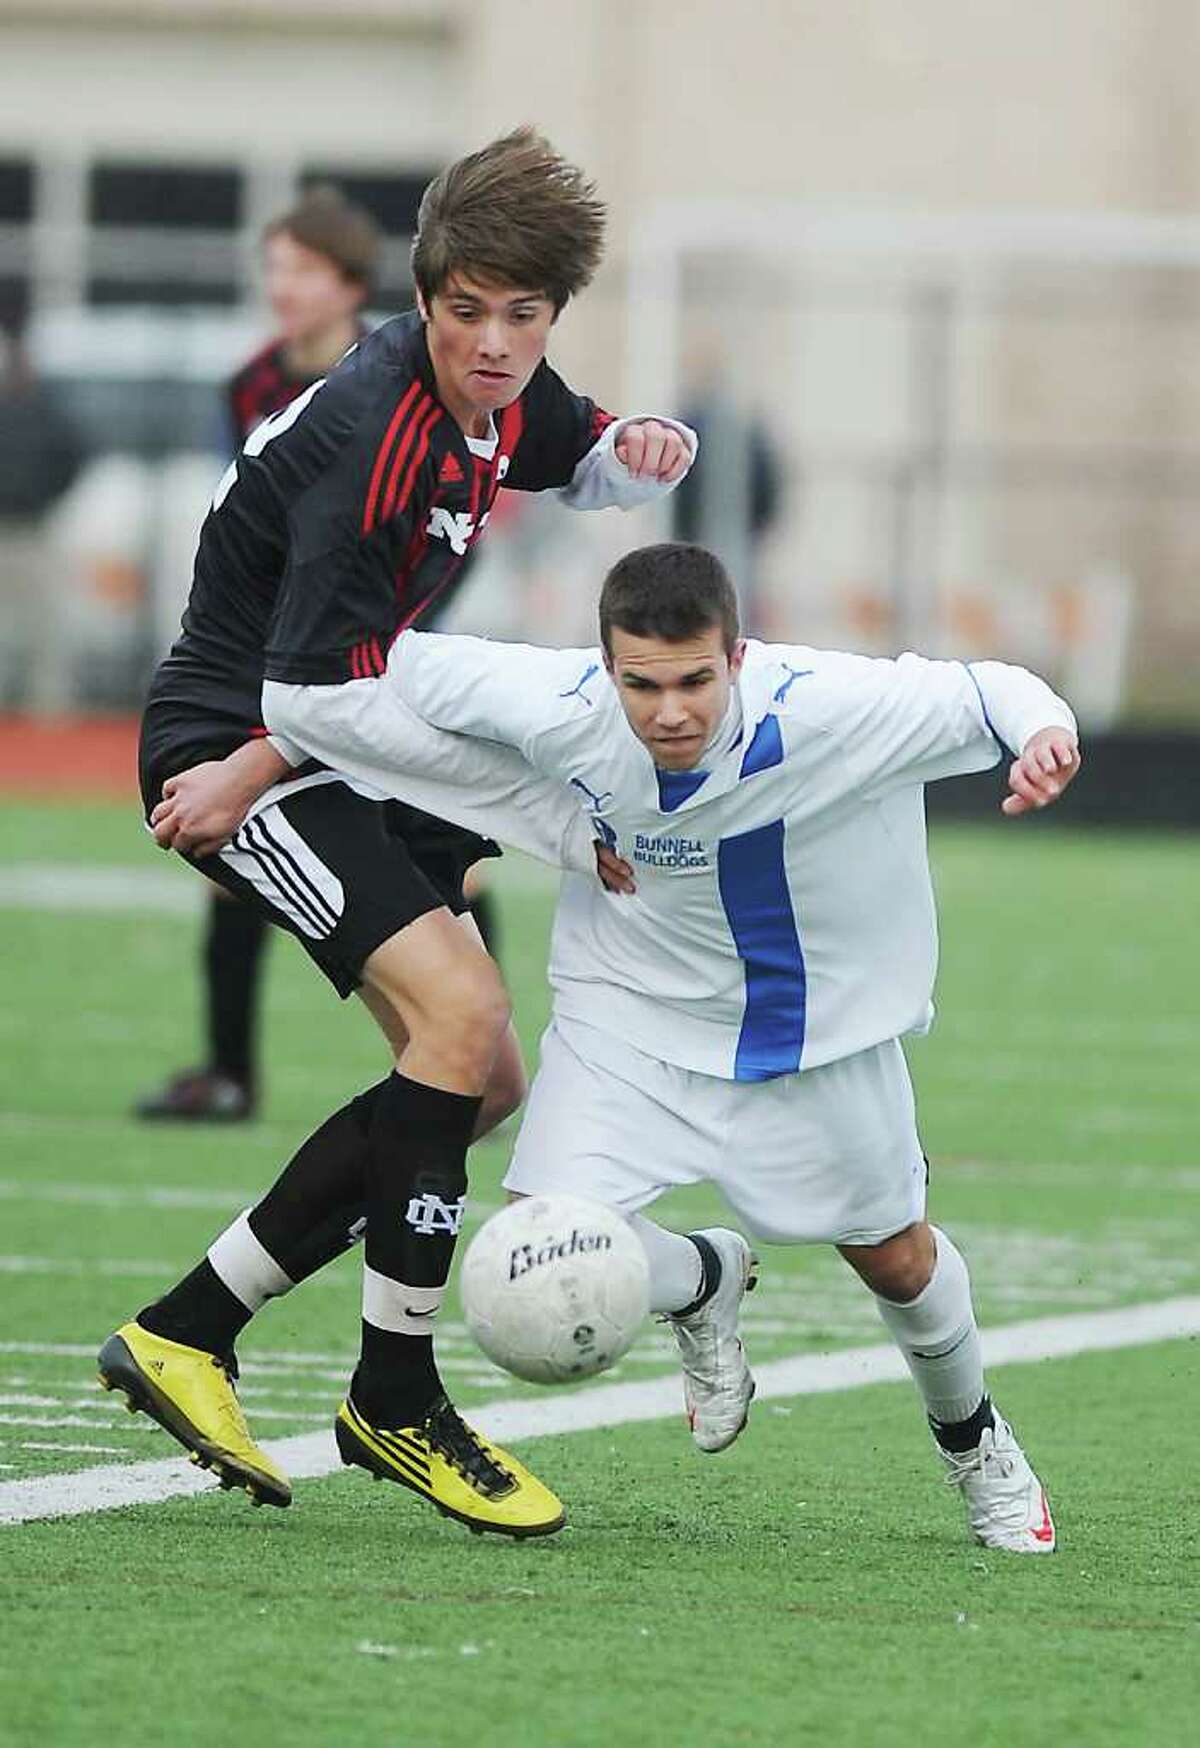 Bunnell's James Gillespie eyes the ball against New Canaan's Nicolas Deambrosio in the Class L boys soccer championship match at Fairfield Ludlowe High School in Fairfield, Conn. on Saturday November 20, 2010. New Canaan won the game 2-0.